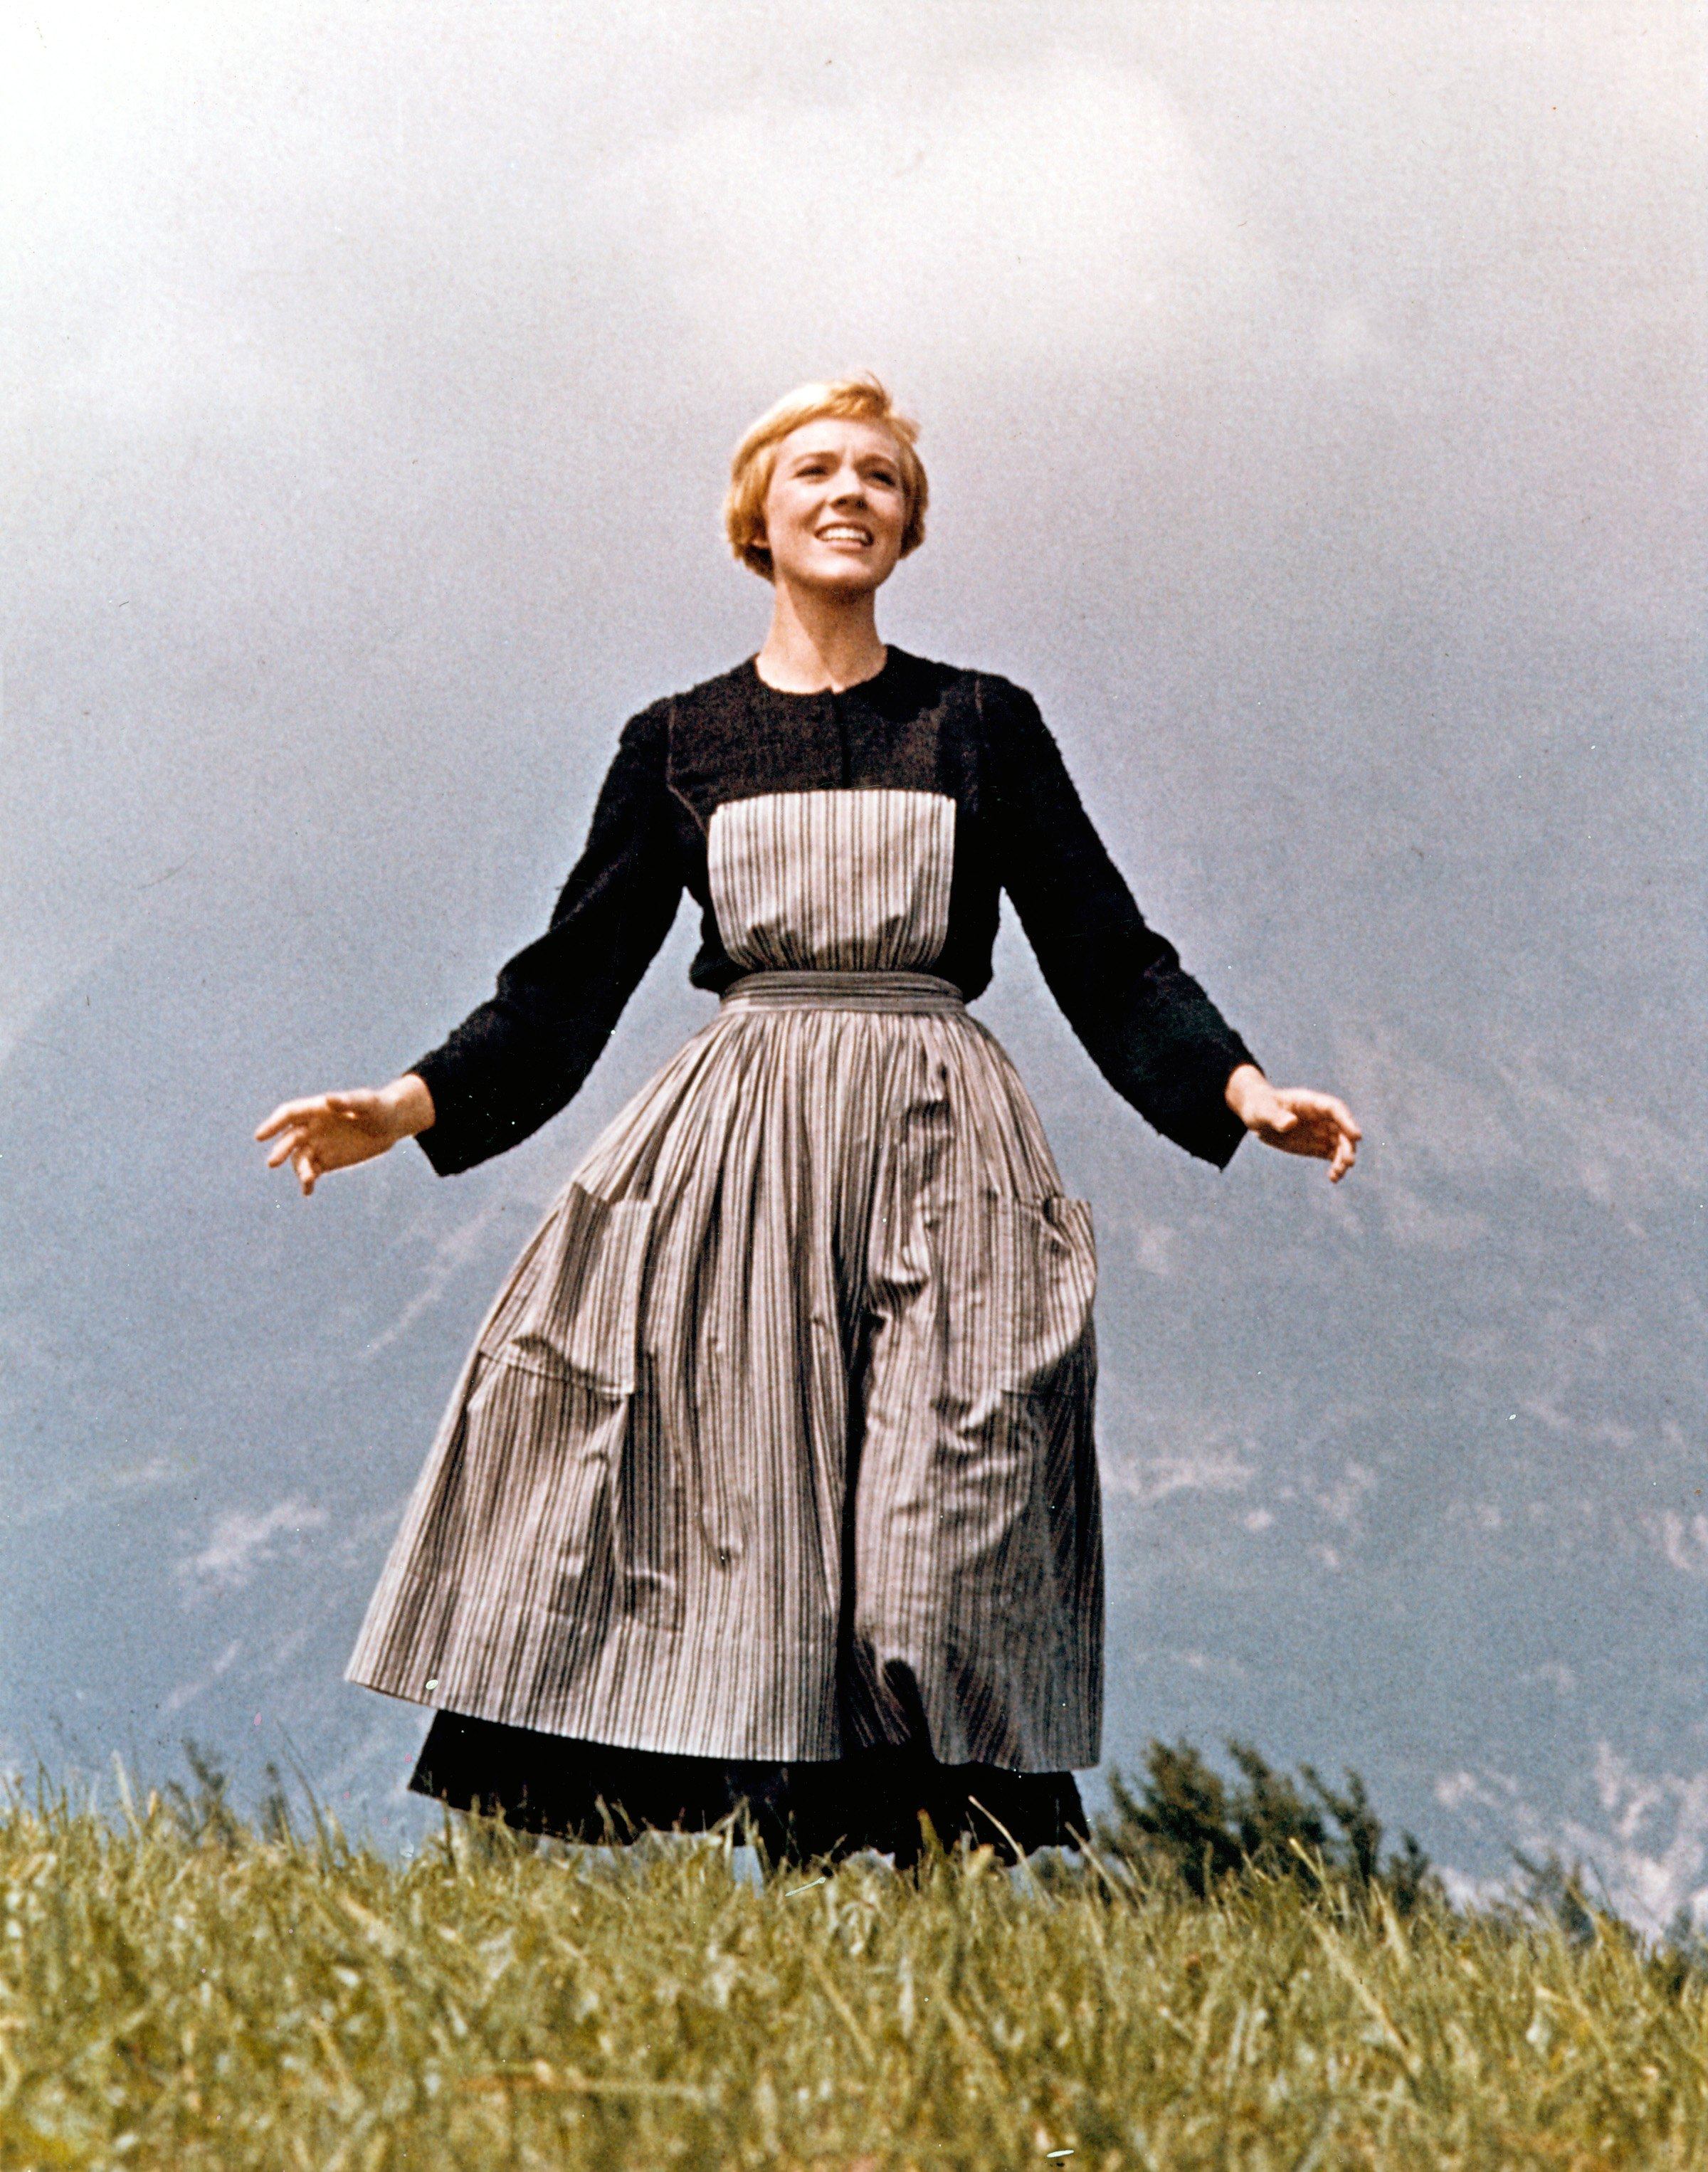 A still from “The Sound of Music”, starring Julie Andrews, which premiered in Hong Kong in March 1966. Photo: Getty Images